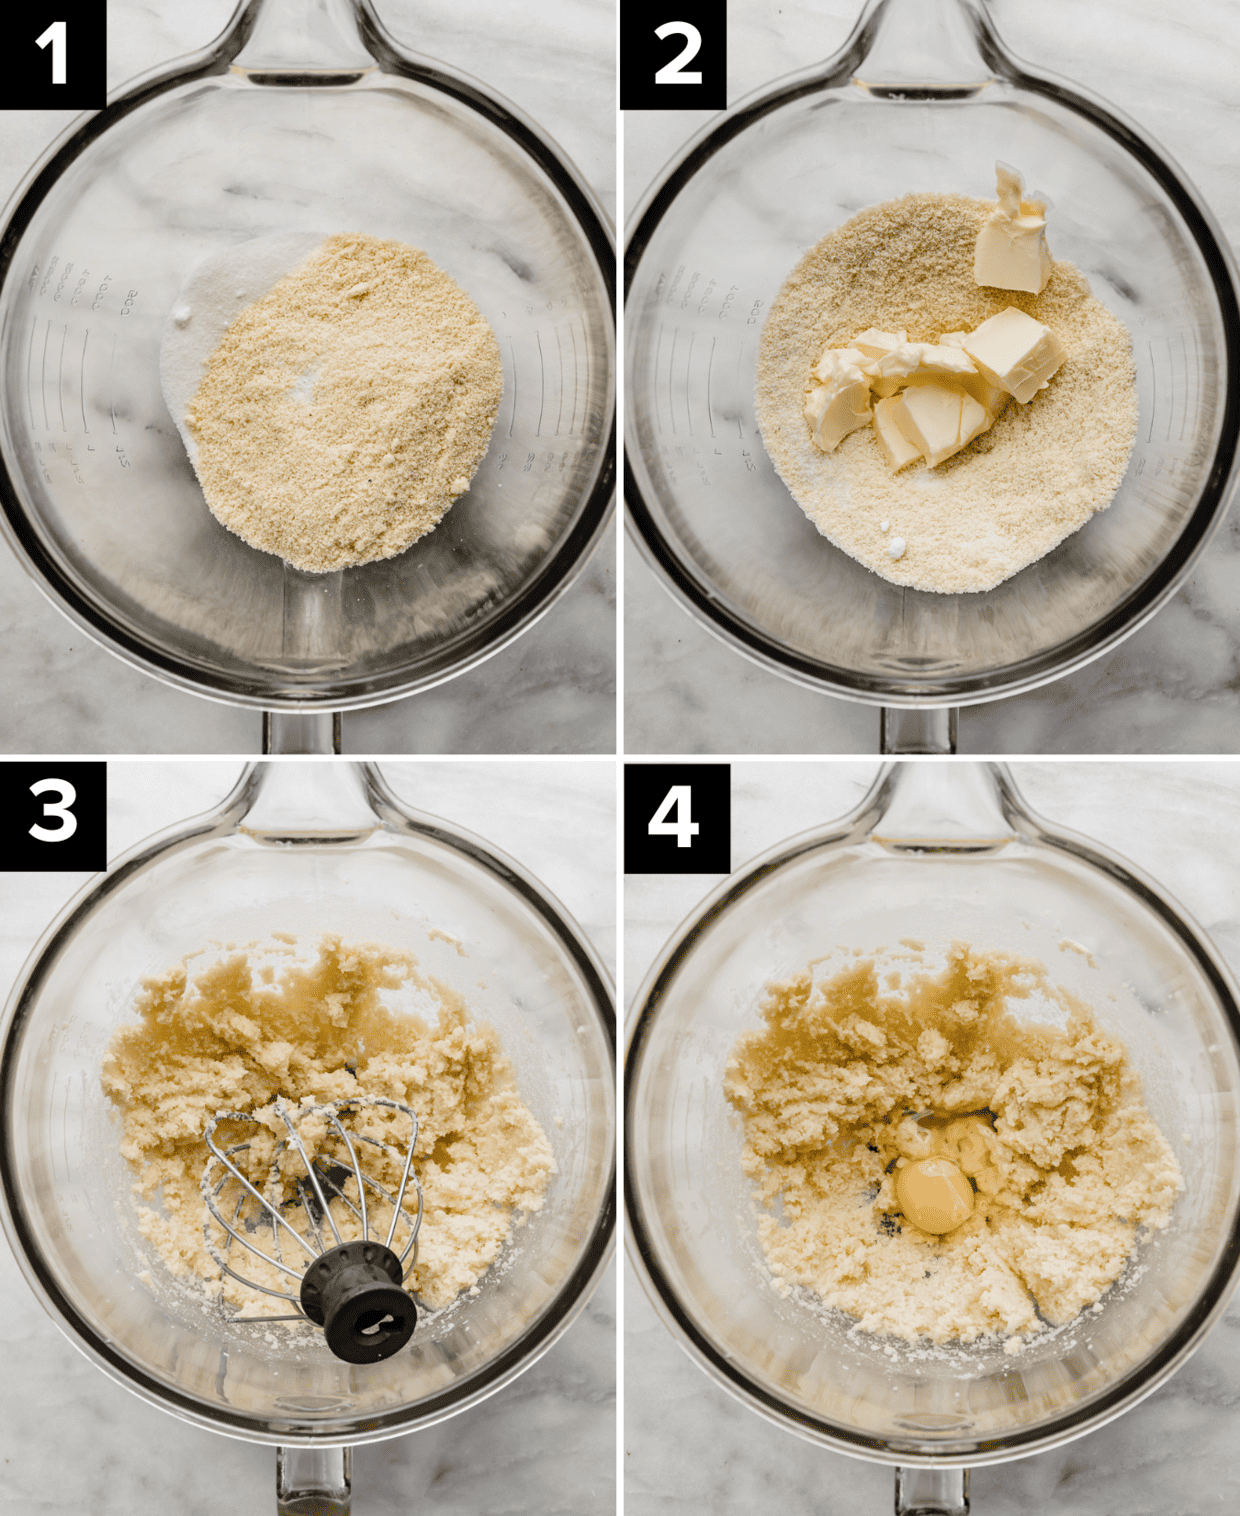 Four images showing how to make Almond Croissants, all images showing a glass bowl with the addition of almond flour, butter, and eggs into the bowl.